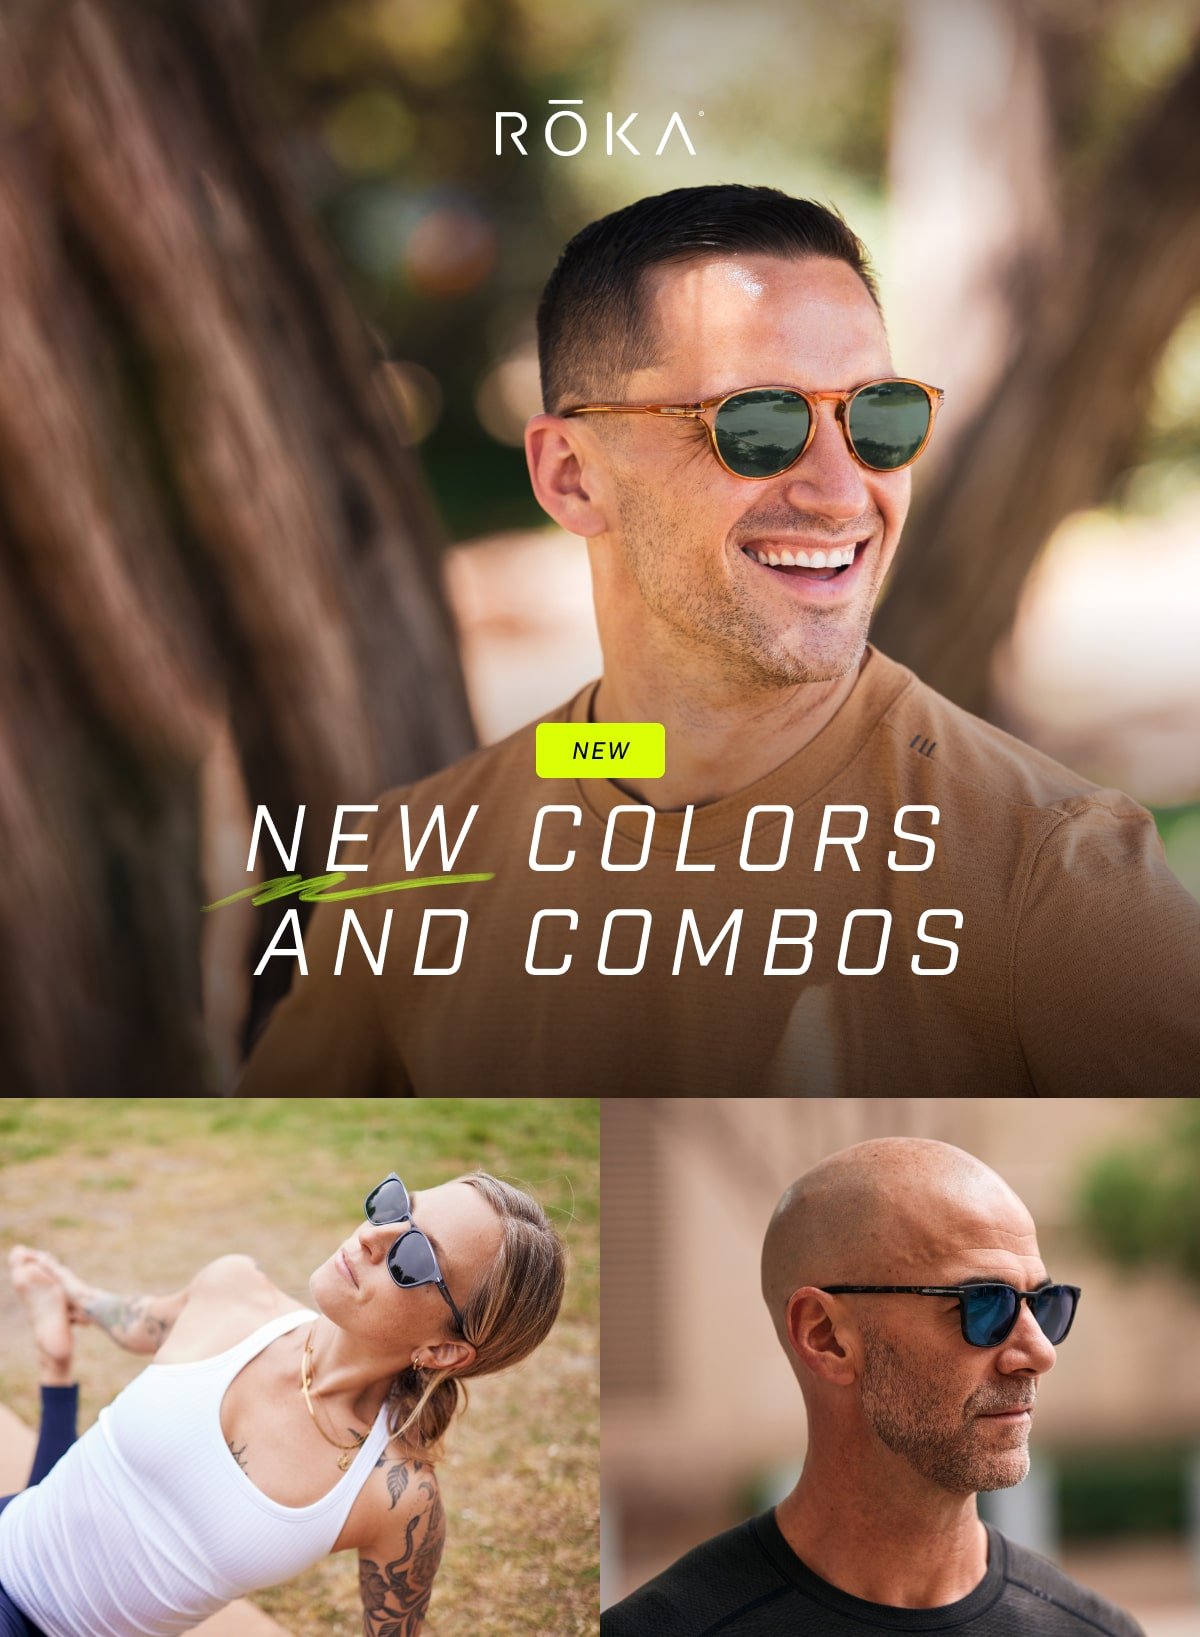 ROKA: Upgrade your eyewear with new colors and combos. 🕶️